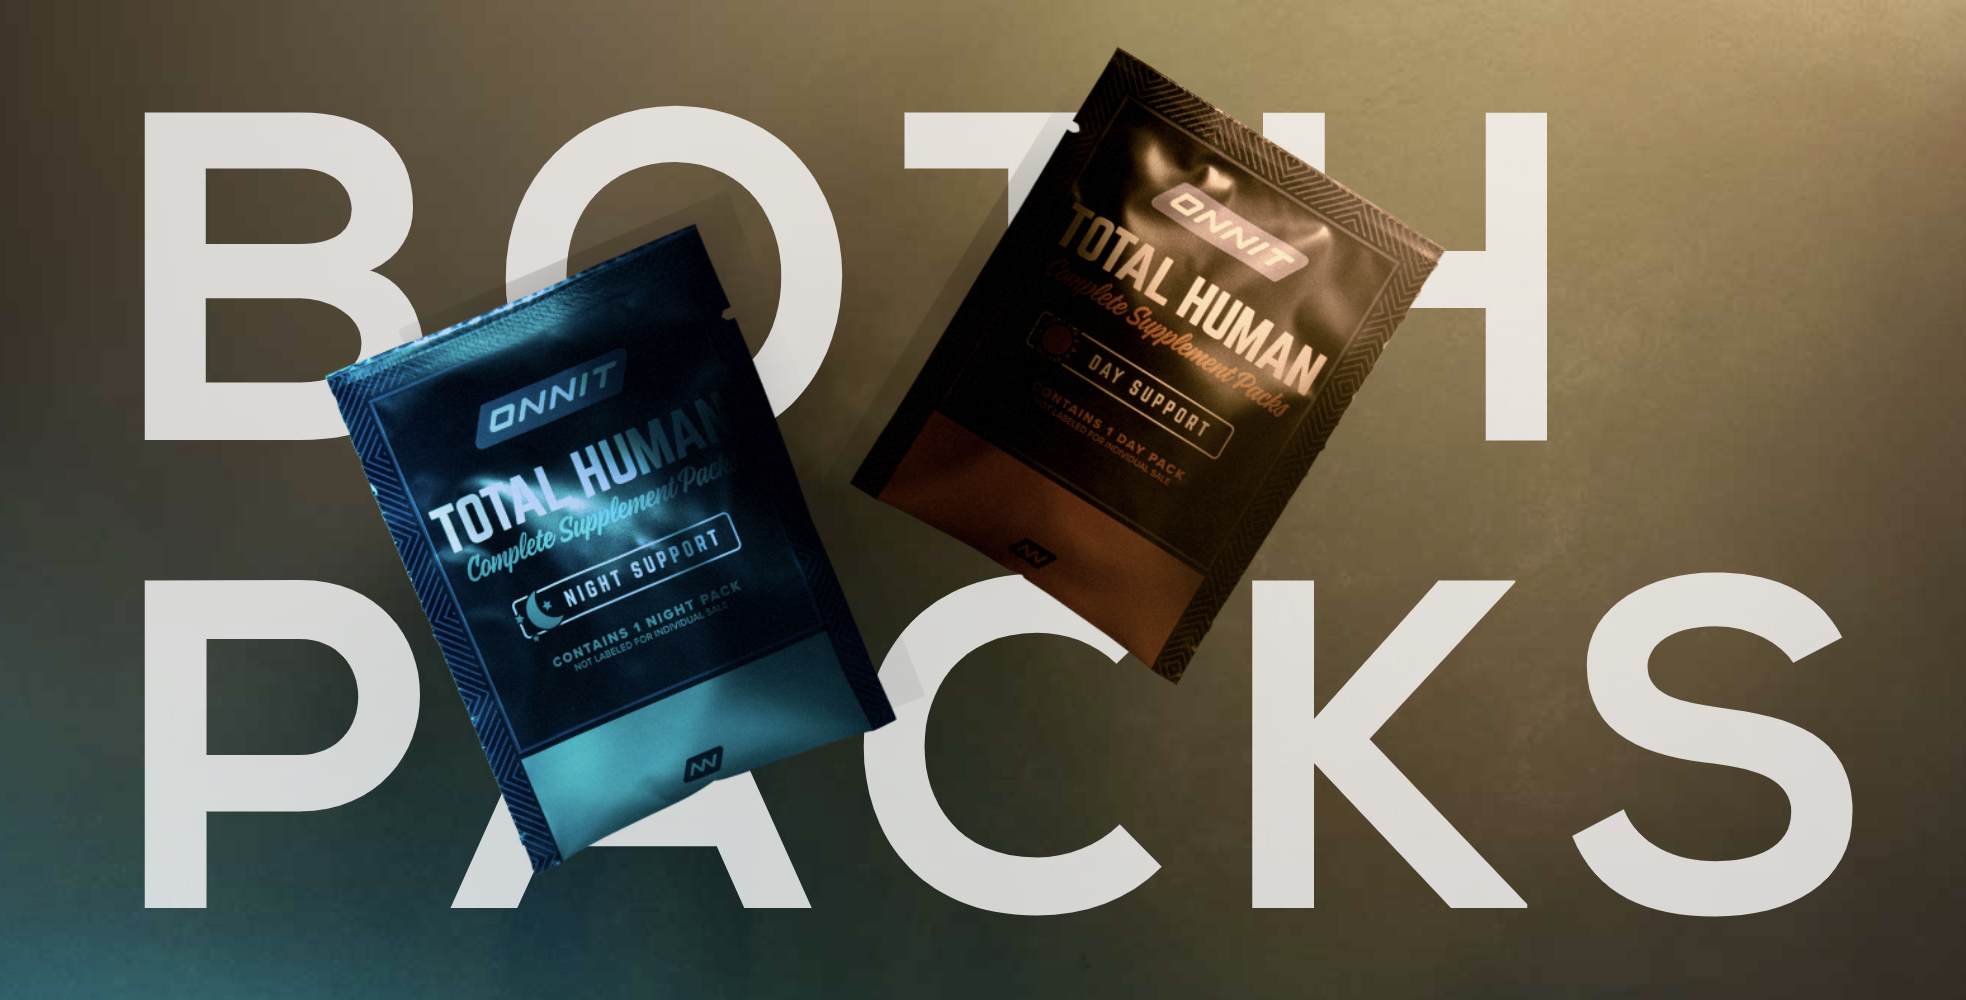 Onnit Total Human Both Packs